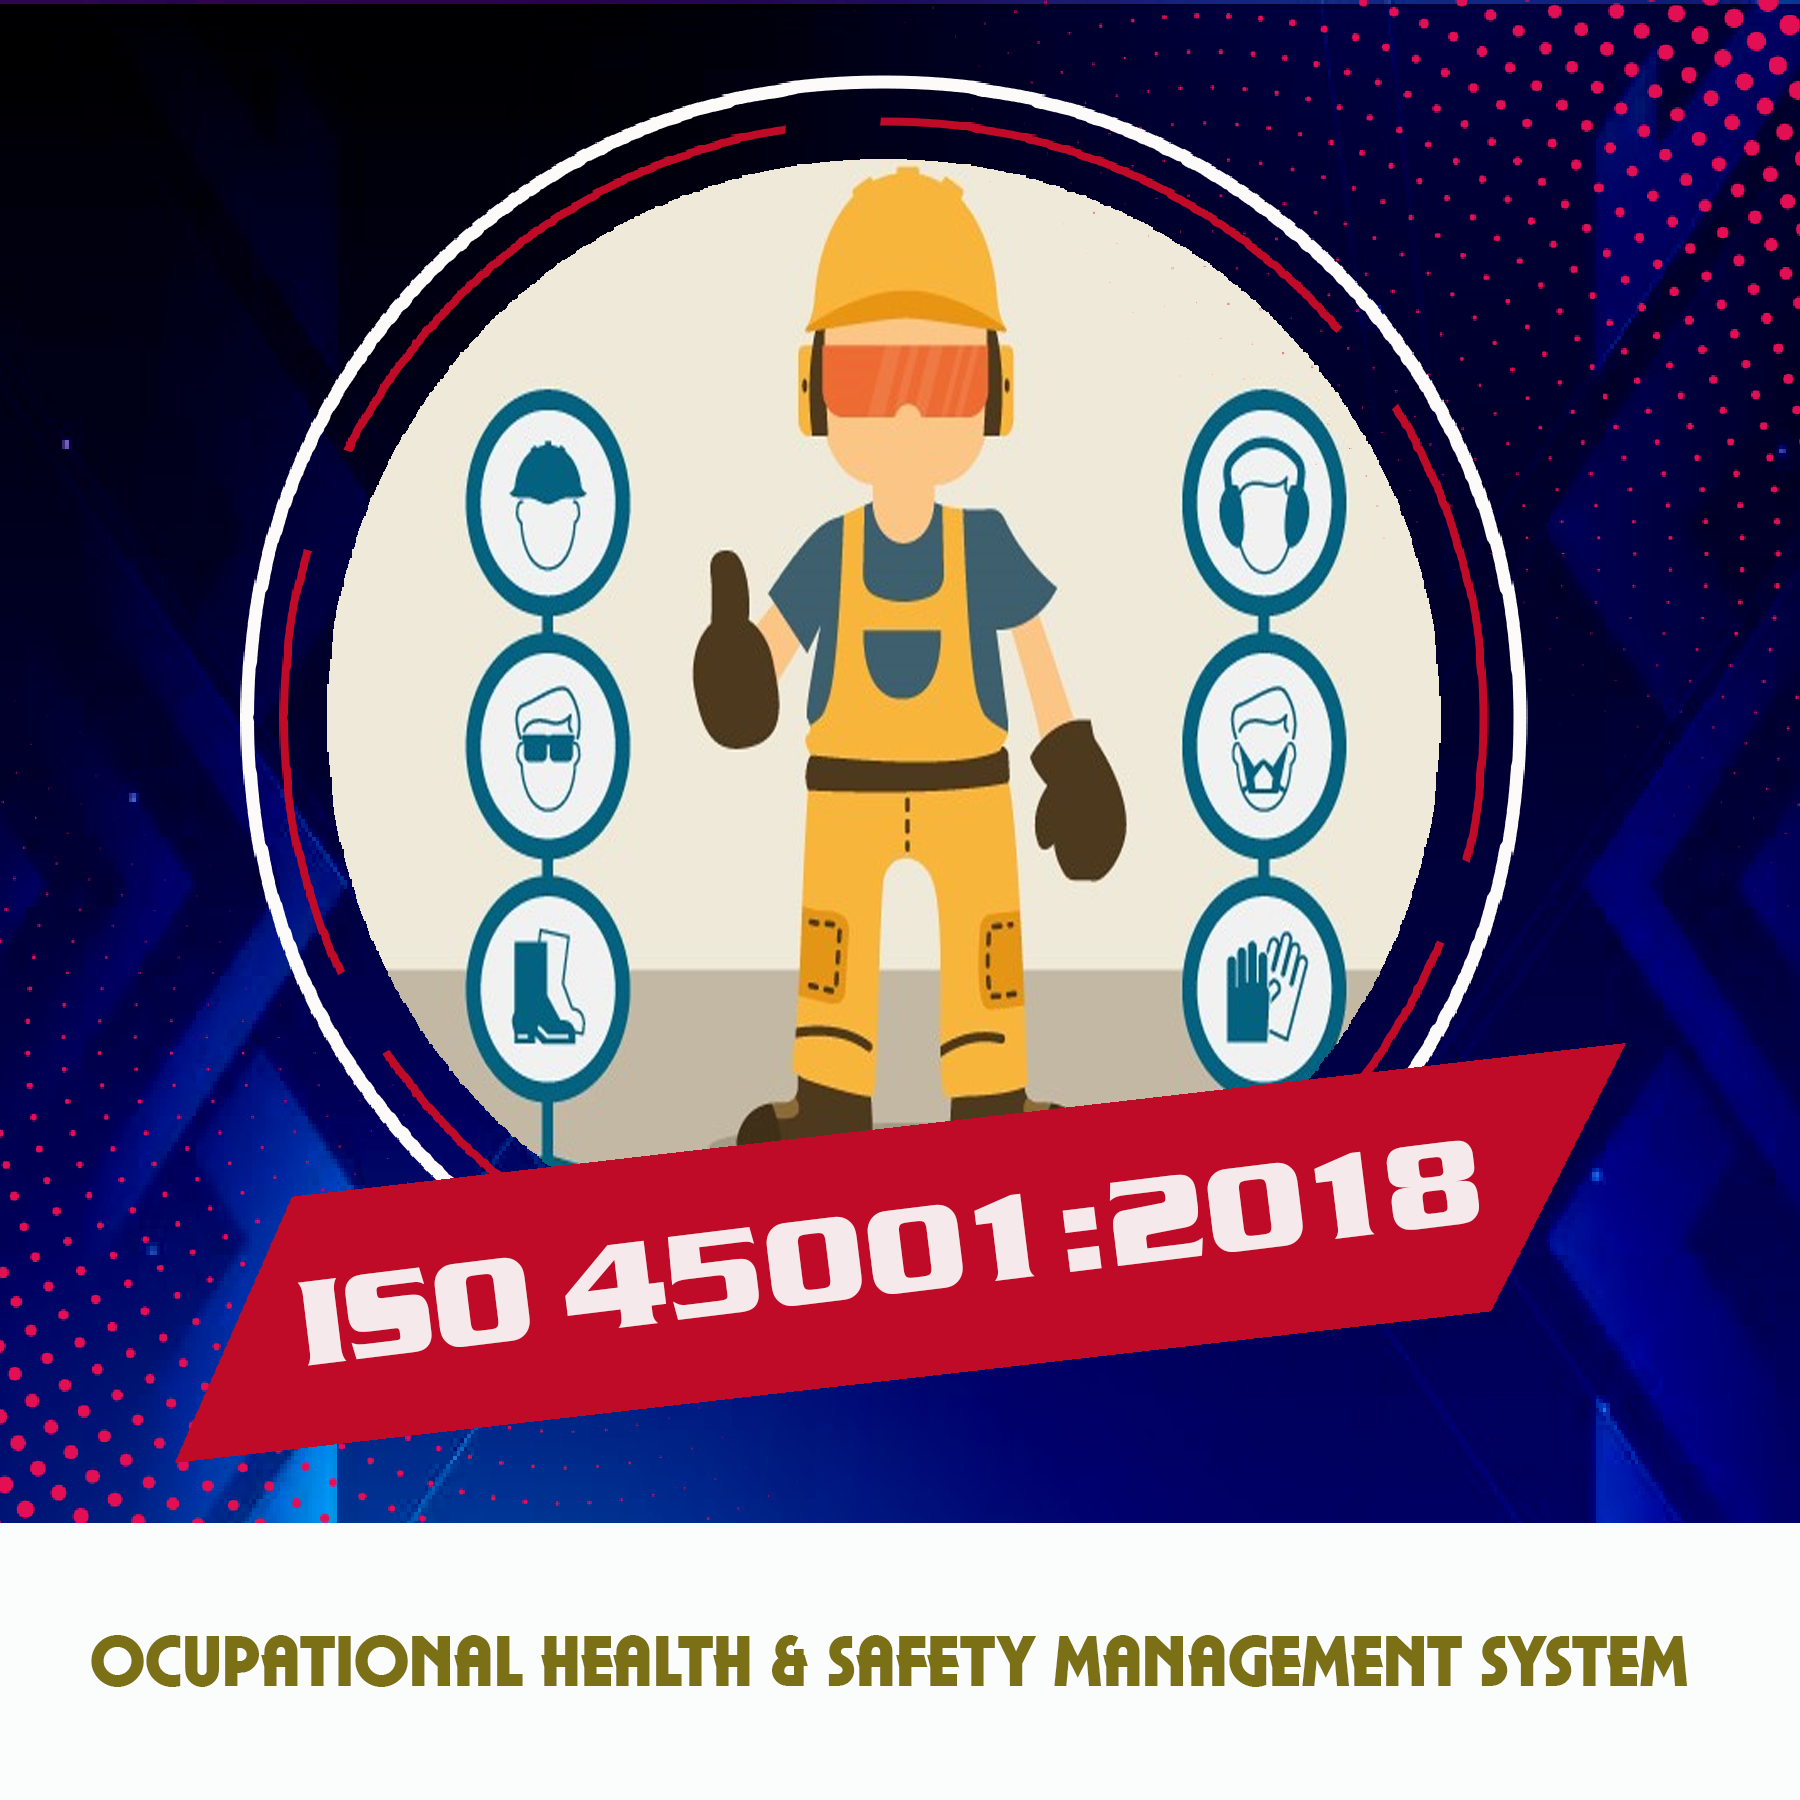  Benefits of Health and Safety Management Systems and their Framework